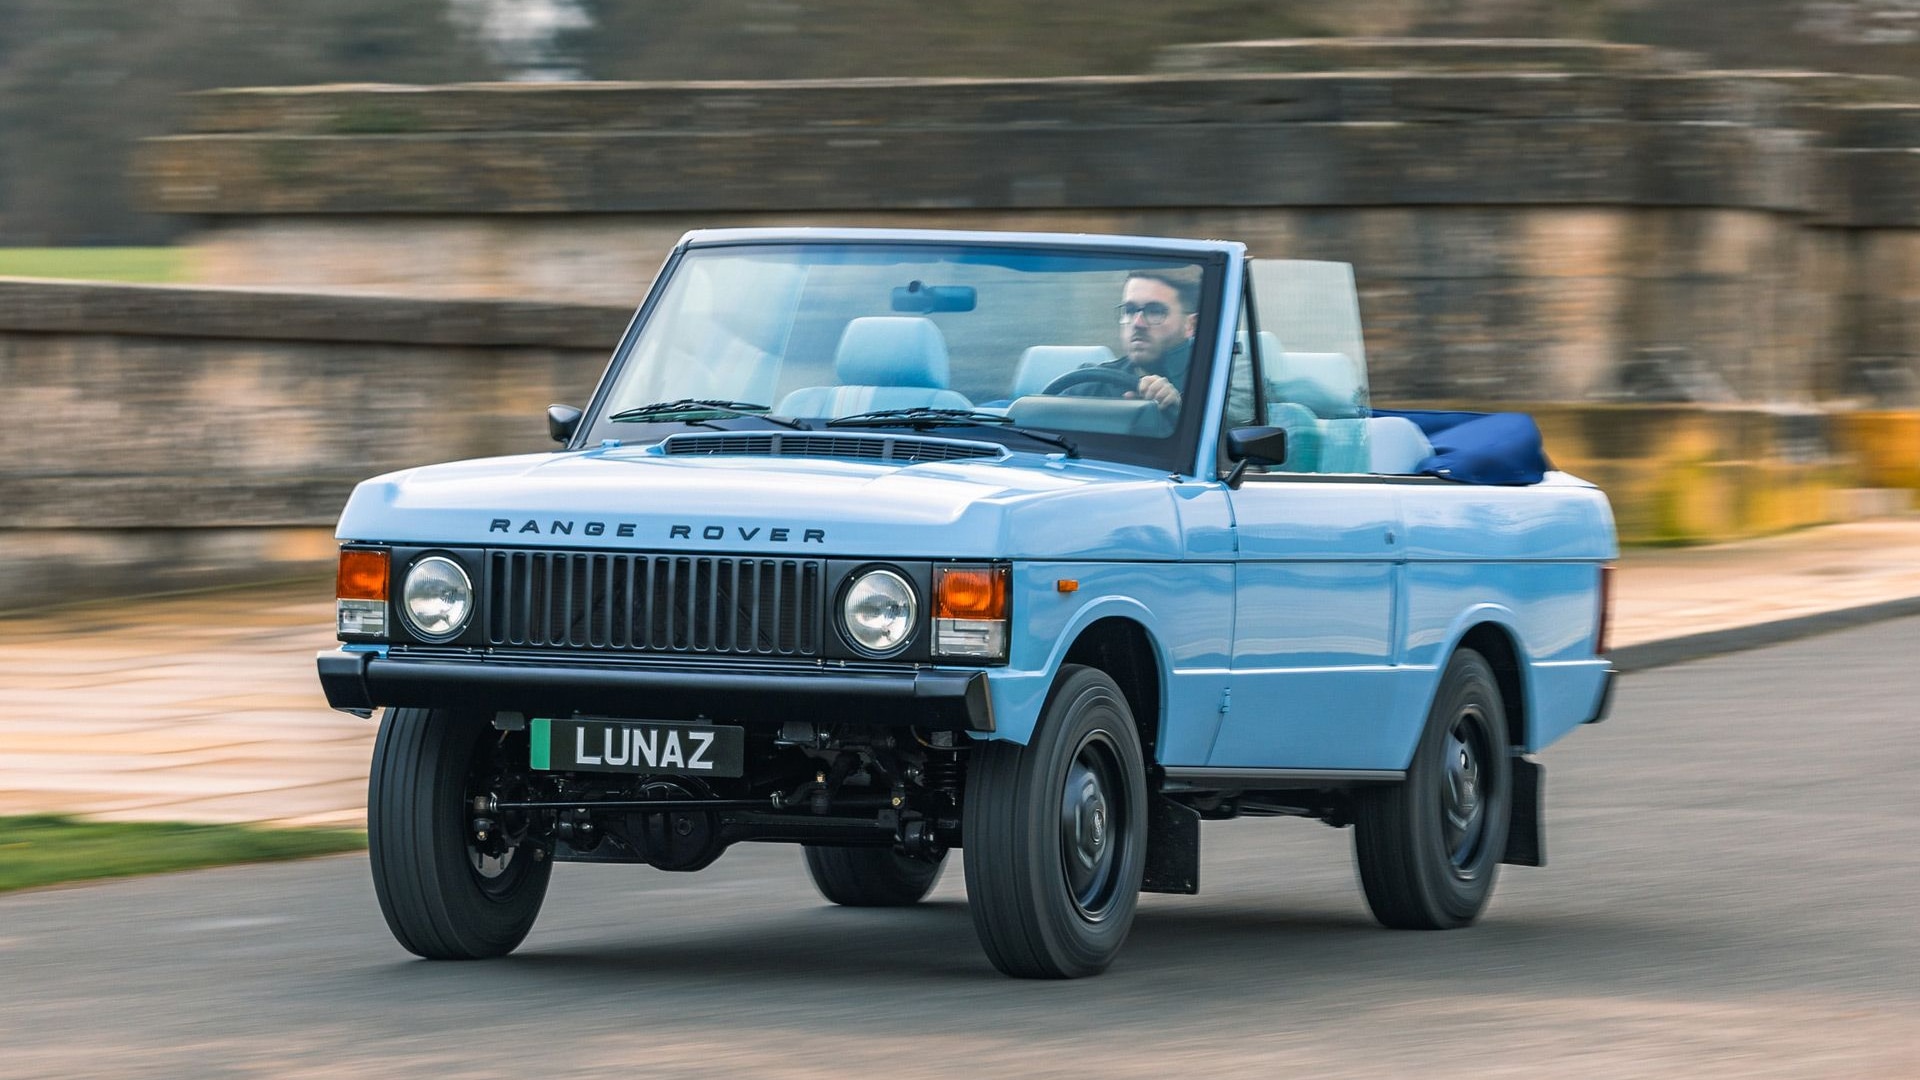 1983 Land Rover Range Rover convertible with EV conversion by Lunaz